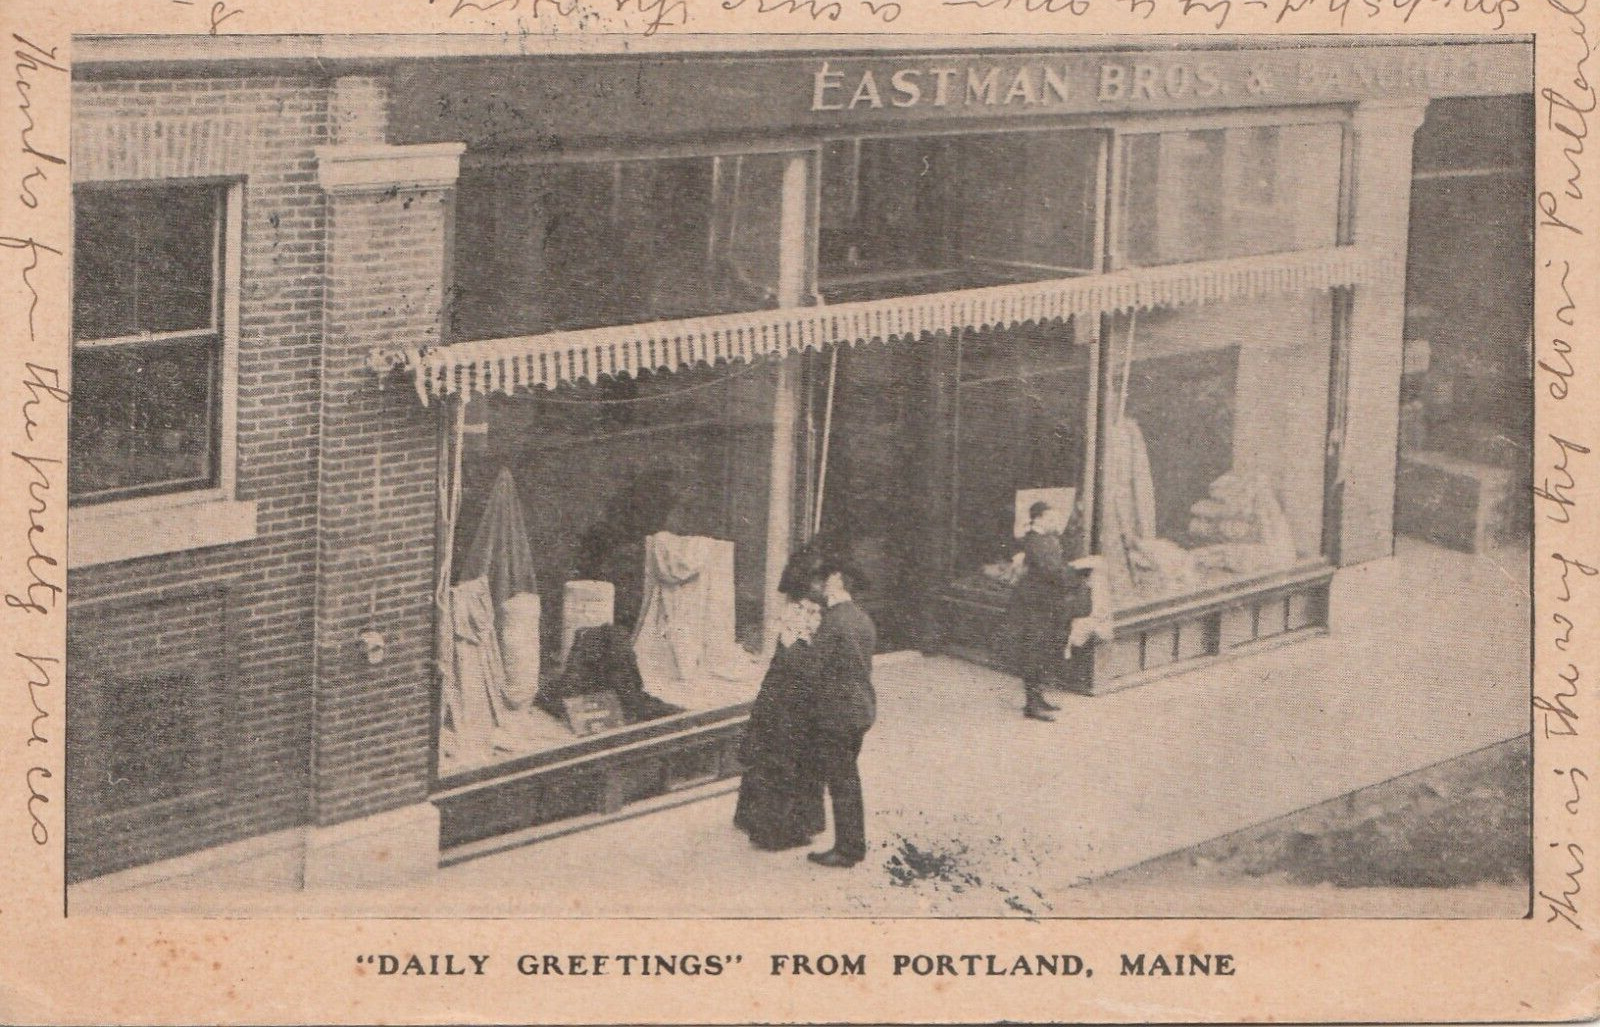 Daily Greetings from Portland Maine Eastman Bros and Bancroft